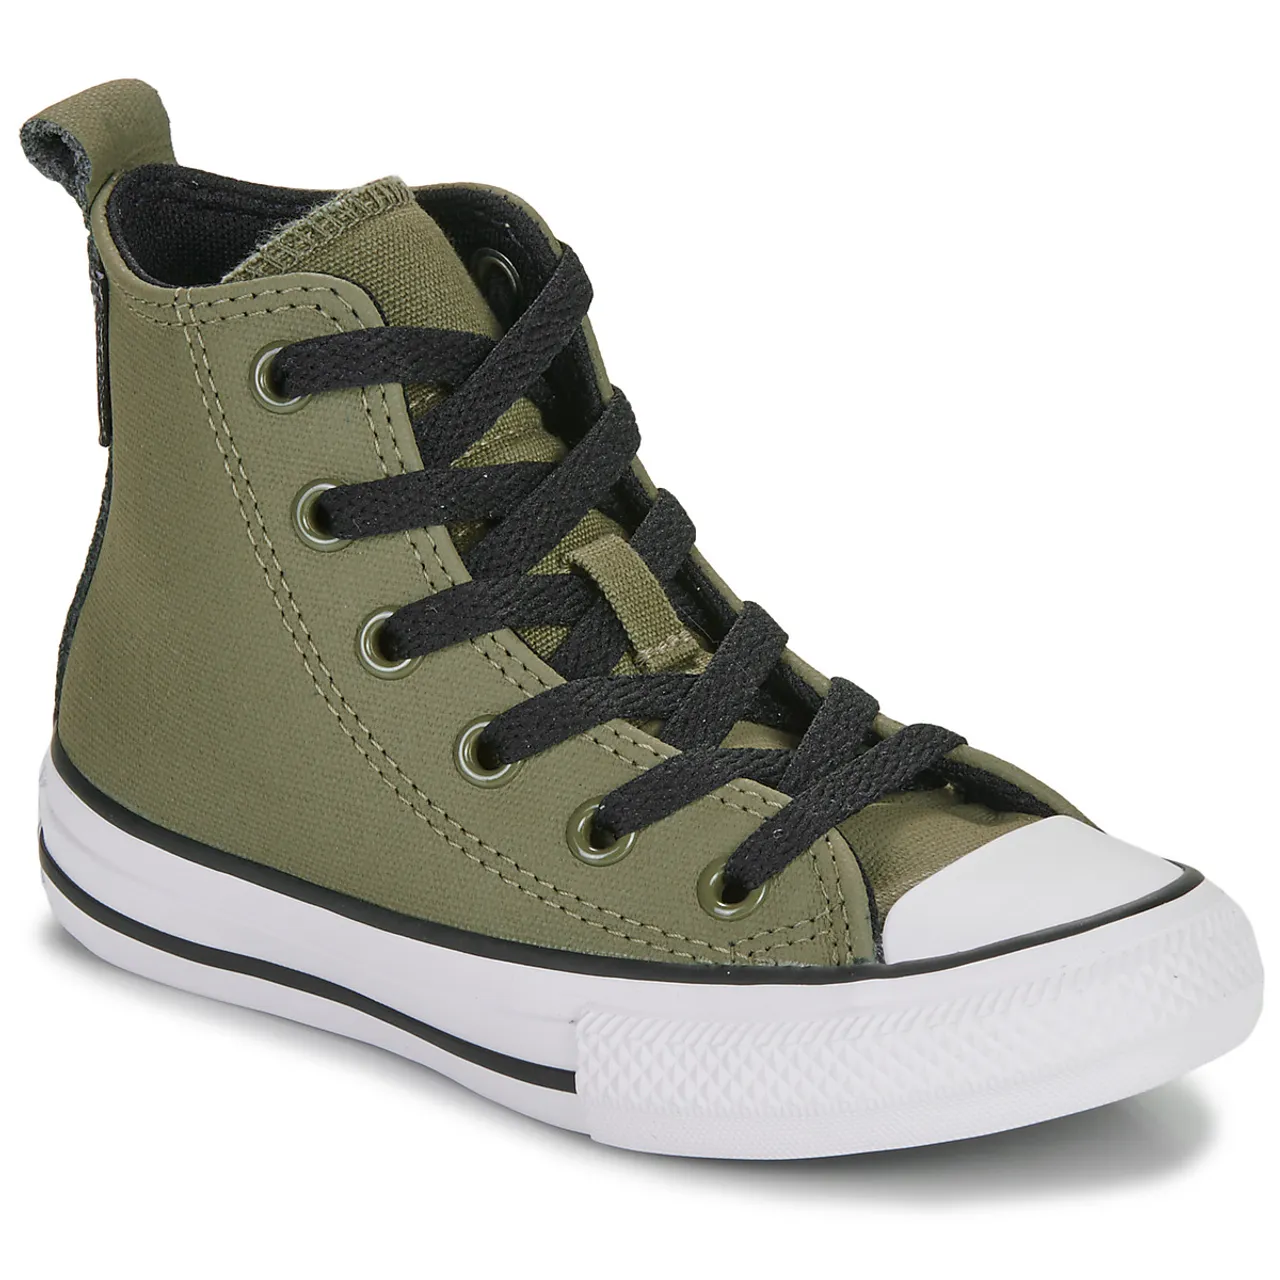 Hoge Sneakers Converse CHUCK TAYLOR ALL STAR COUNTER CLIMATE